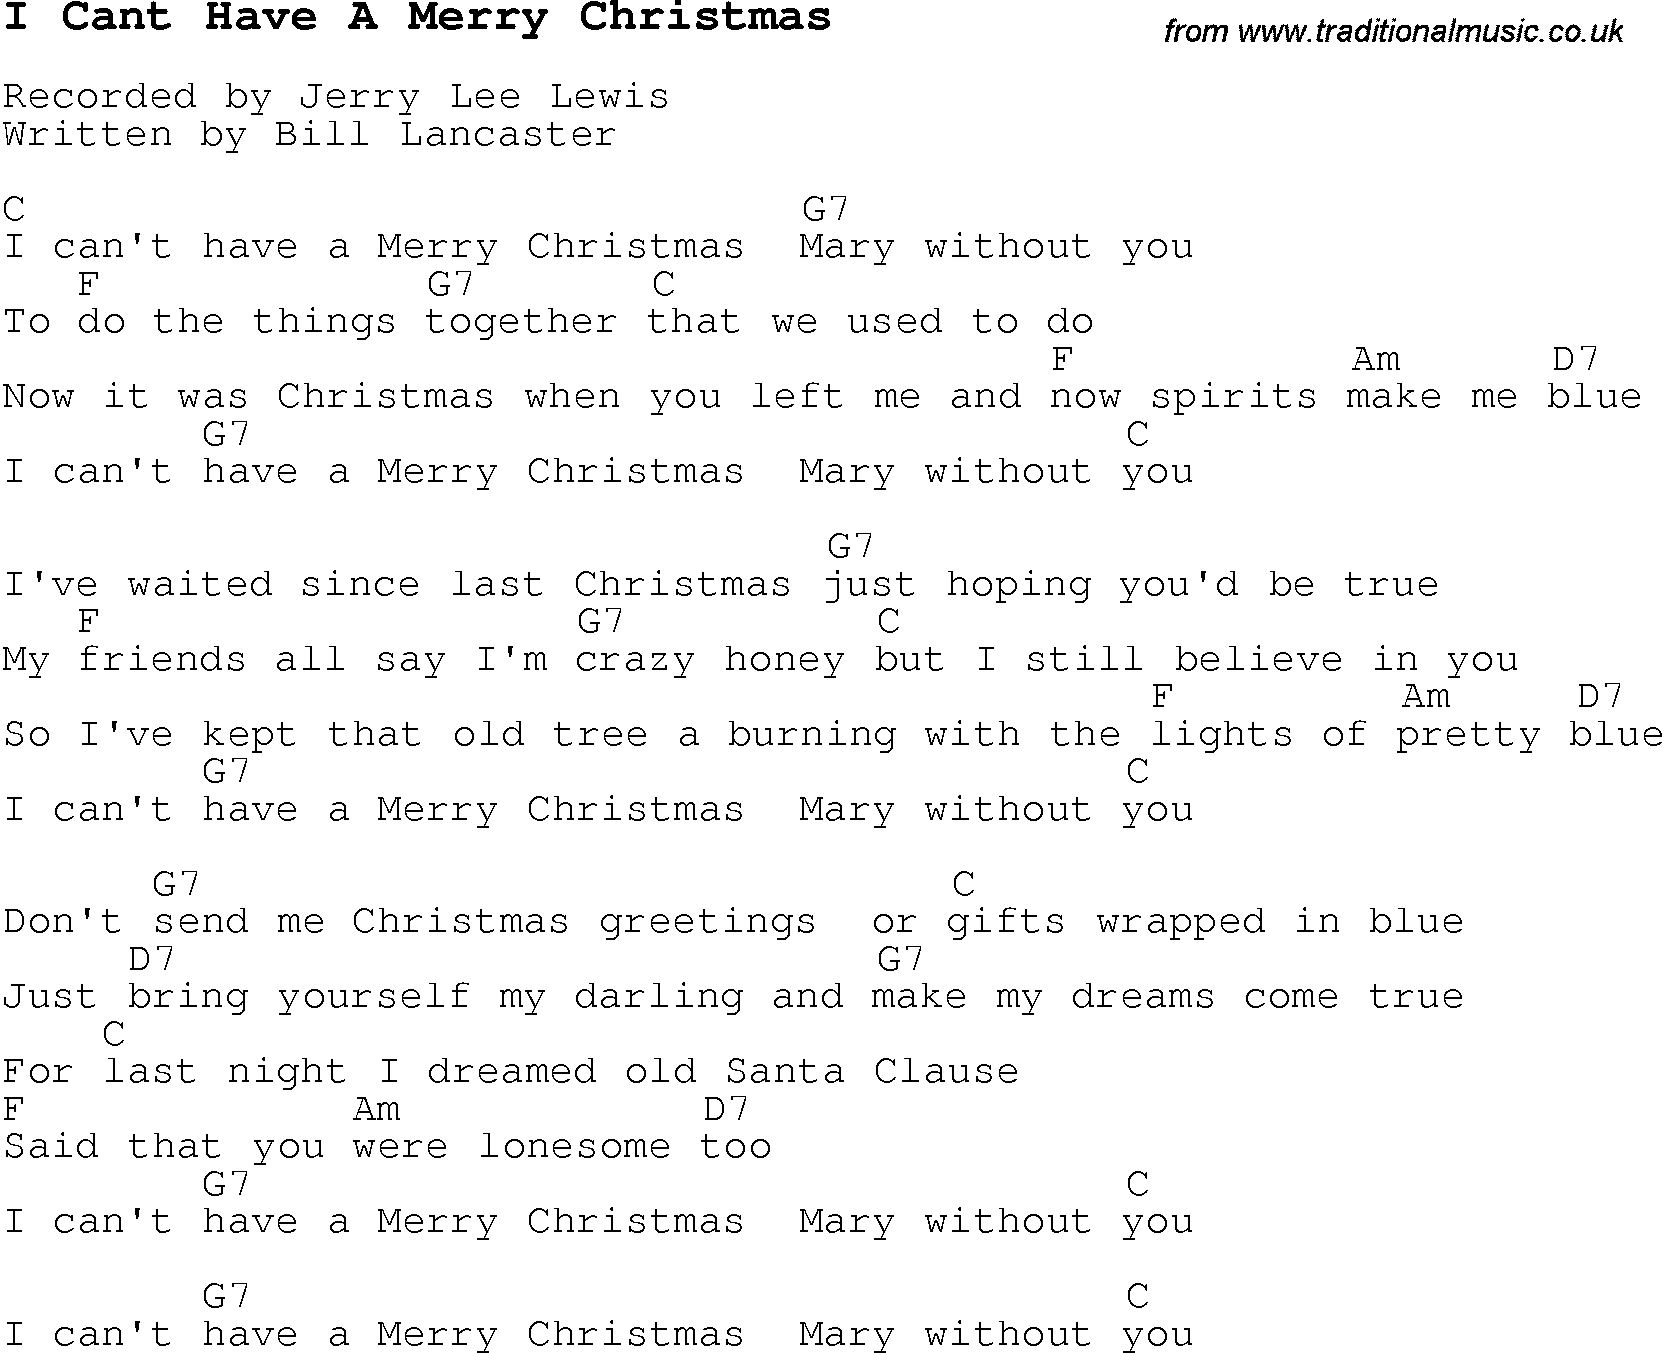 Christmas Songs and Carols, lyrics with chords for guitar banjo for I Cant Have A Merry Christmas